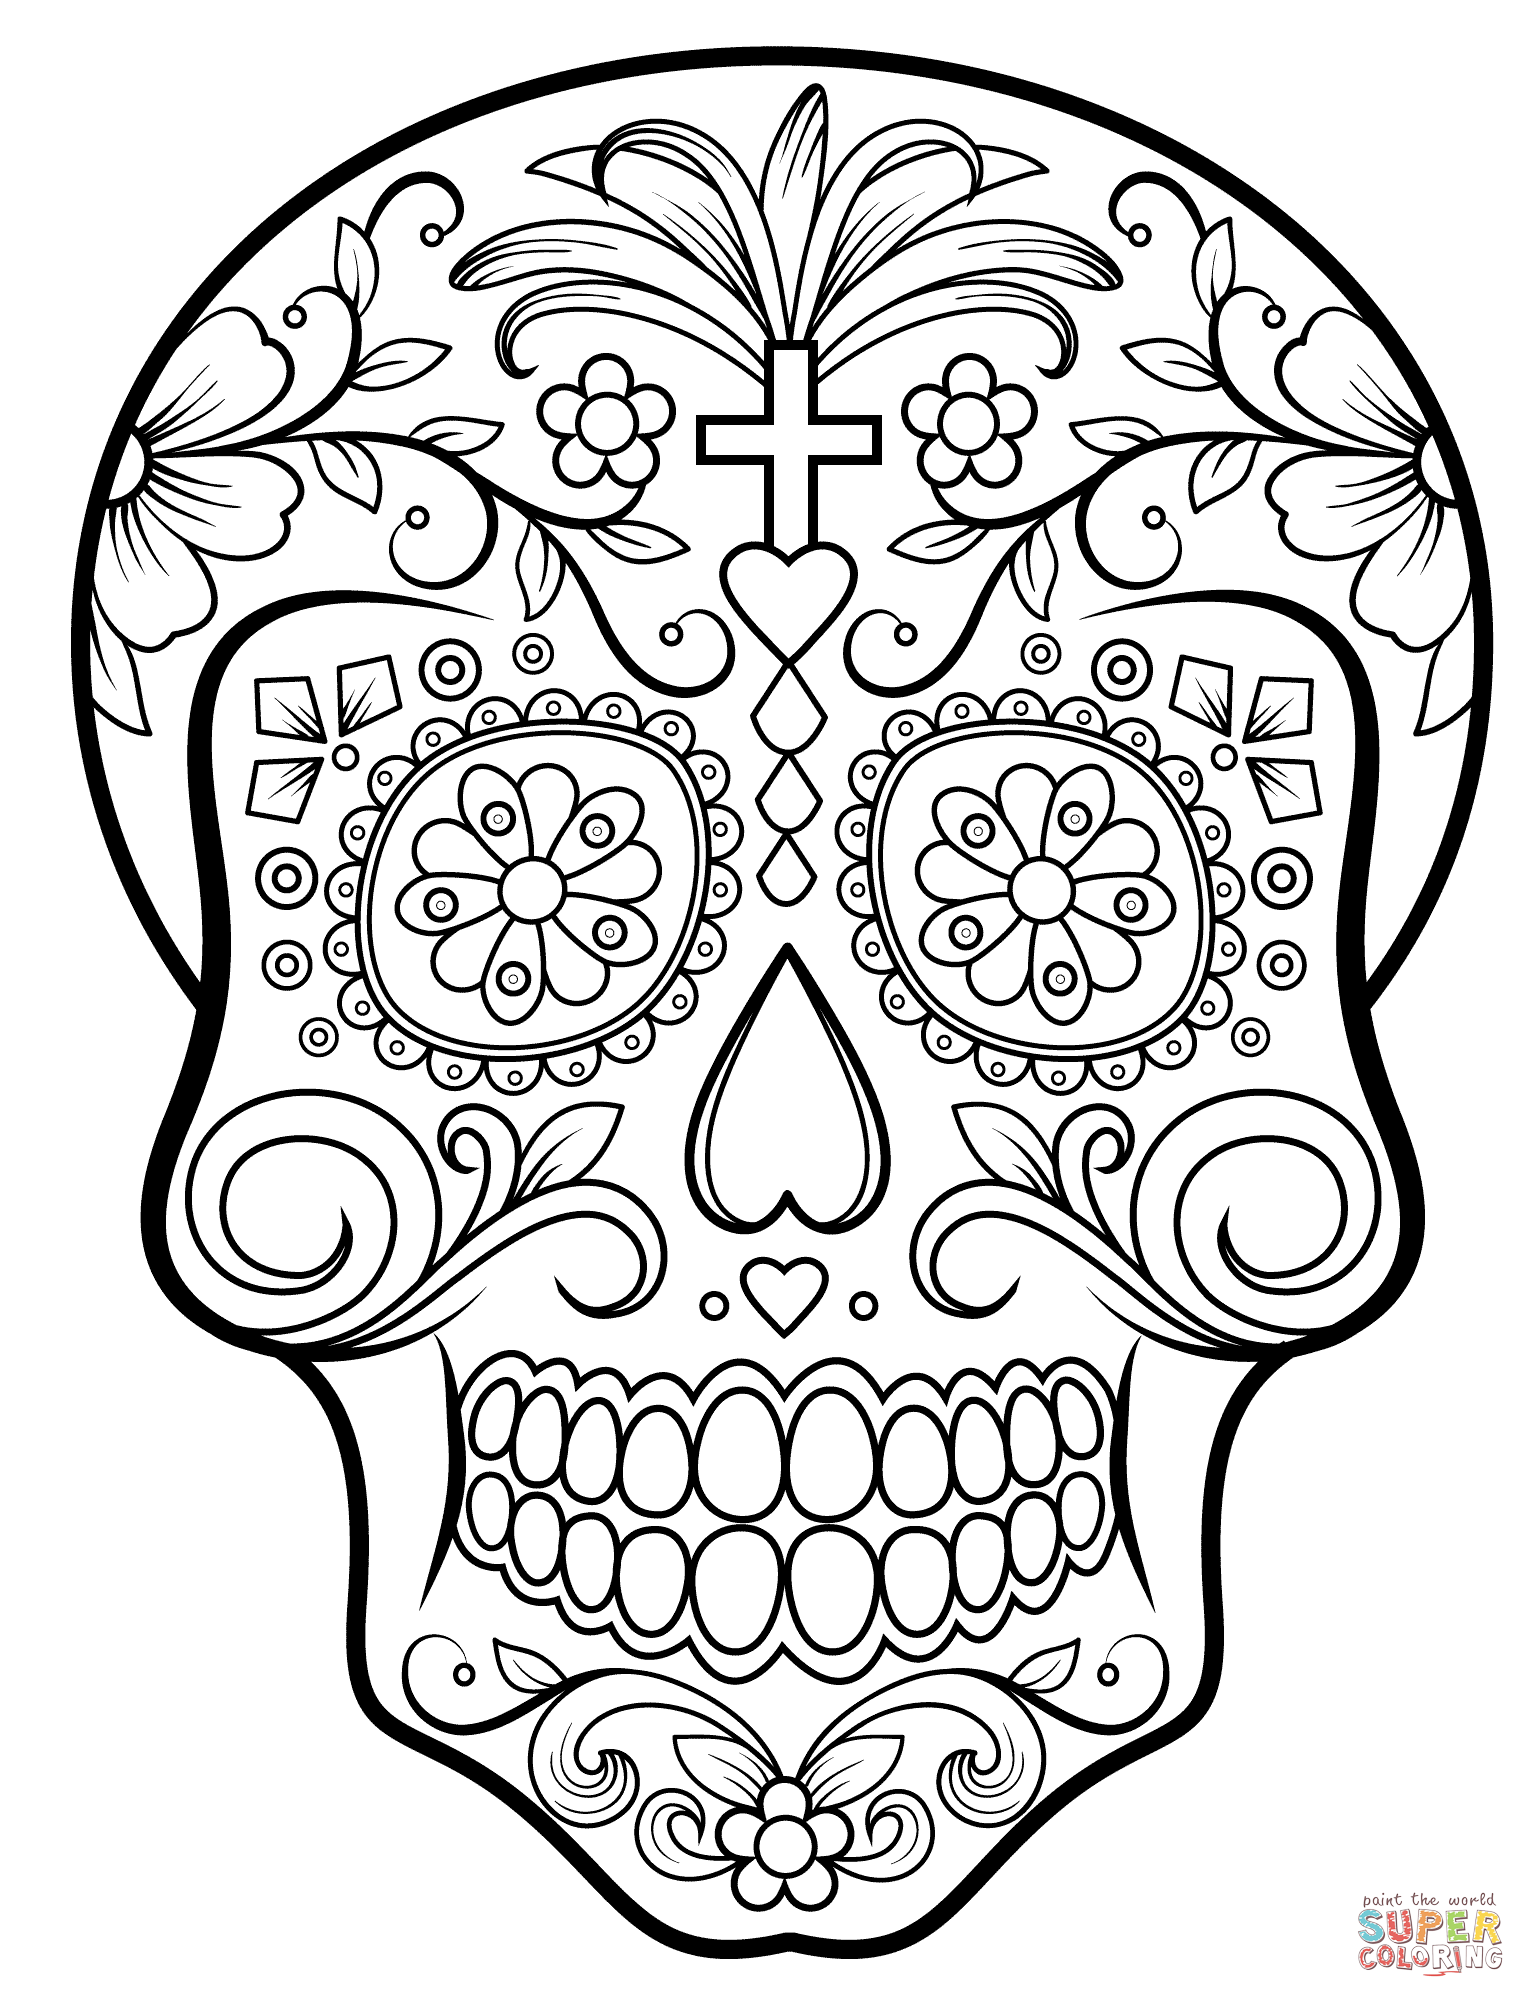 Skull And Crossbones Coloring Pages Skull Color Pages Mexican ...